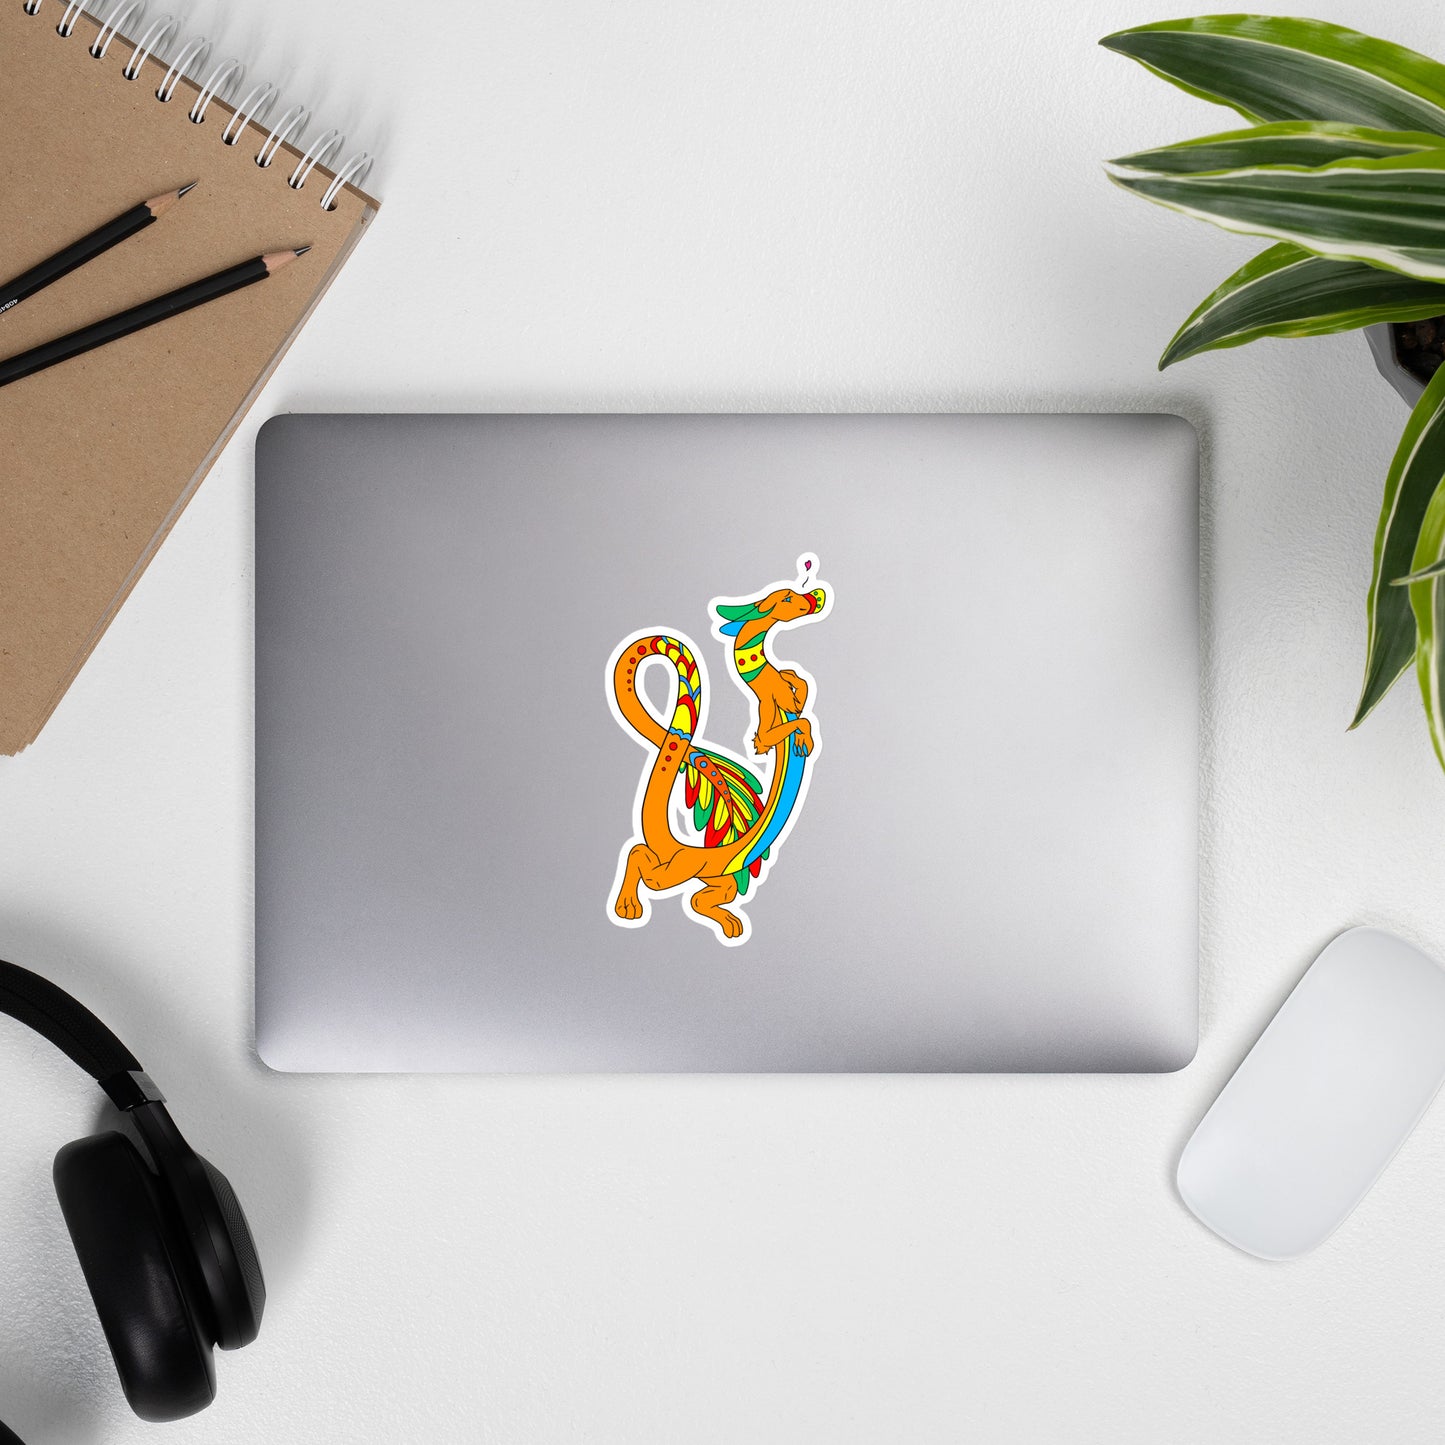 Domingo the Aztec Fuzzy Noodle Dragon. Original character design kiss-cut vinyl sticker with white border. 5.5 inches tall. Shown on a laptop.